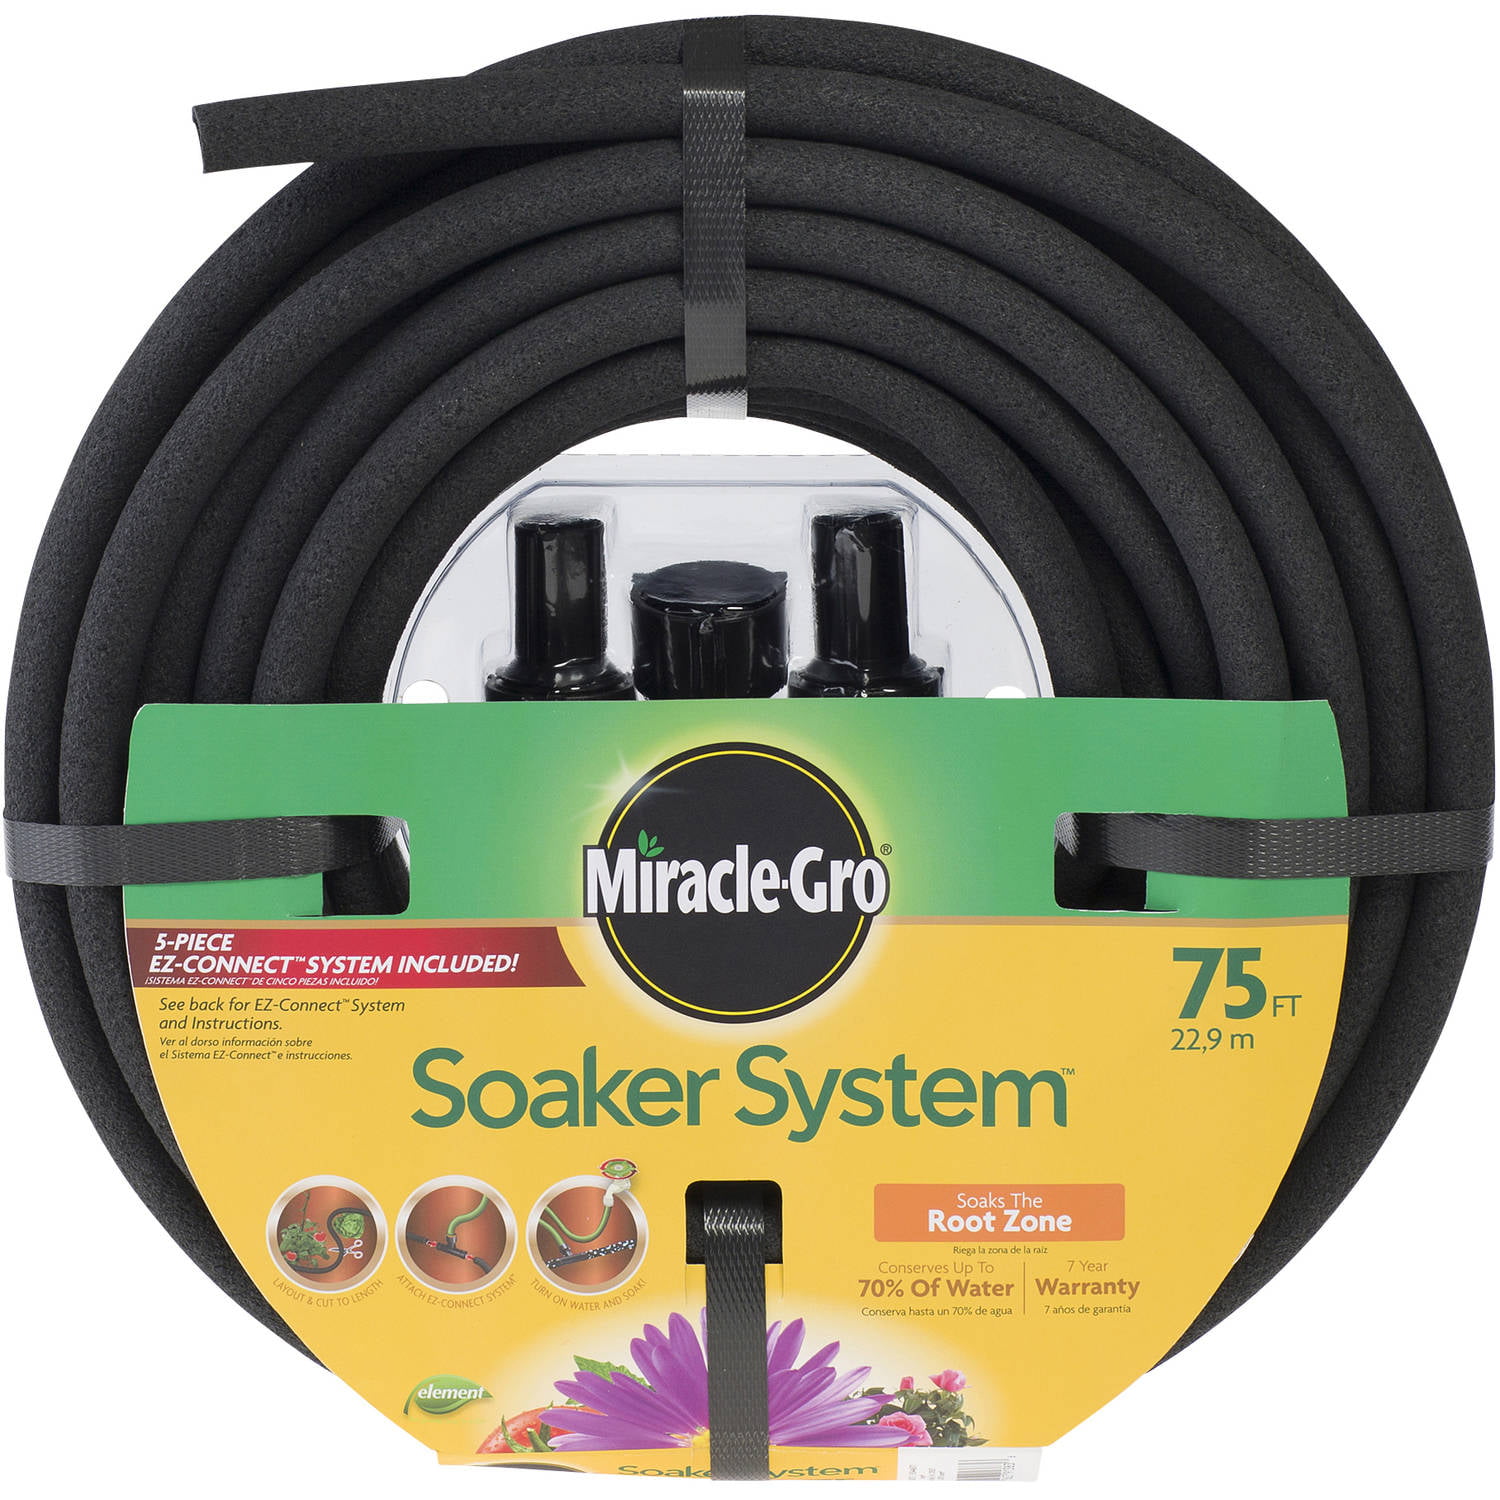 Miracle Gro SMG12828 50ft x 3/8in Soaker Hose Black 